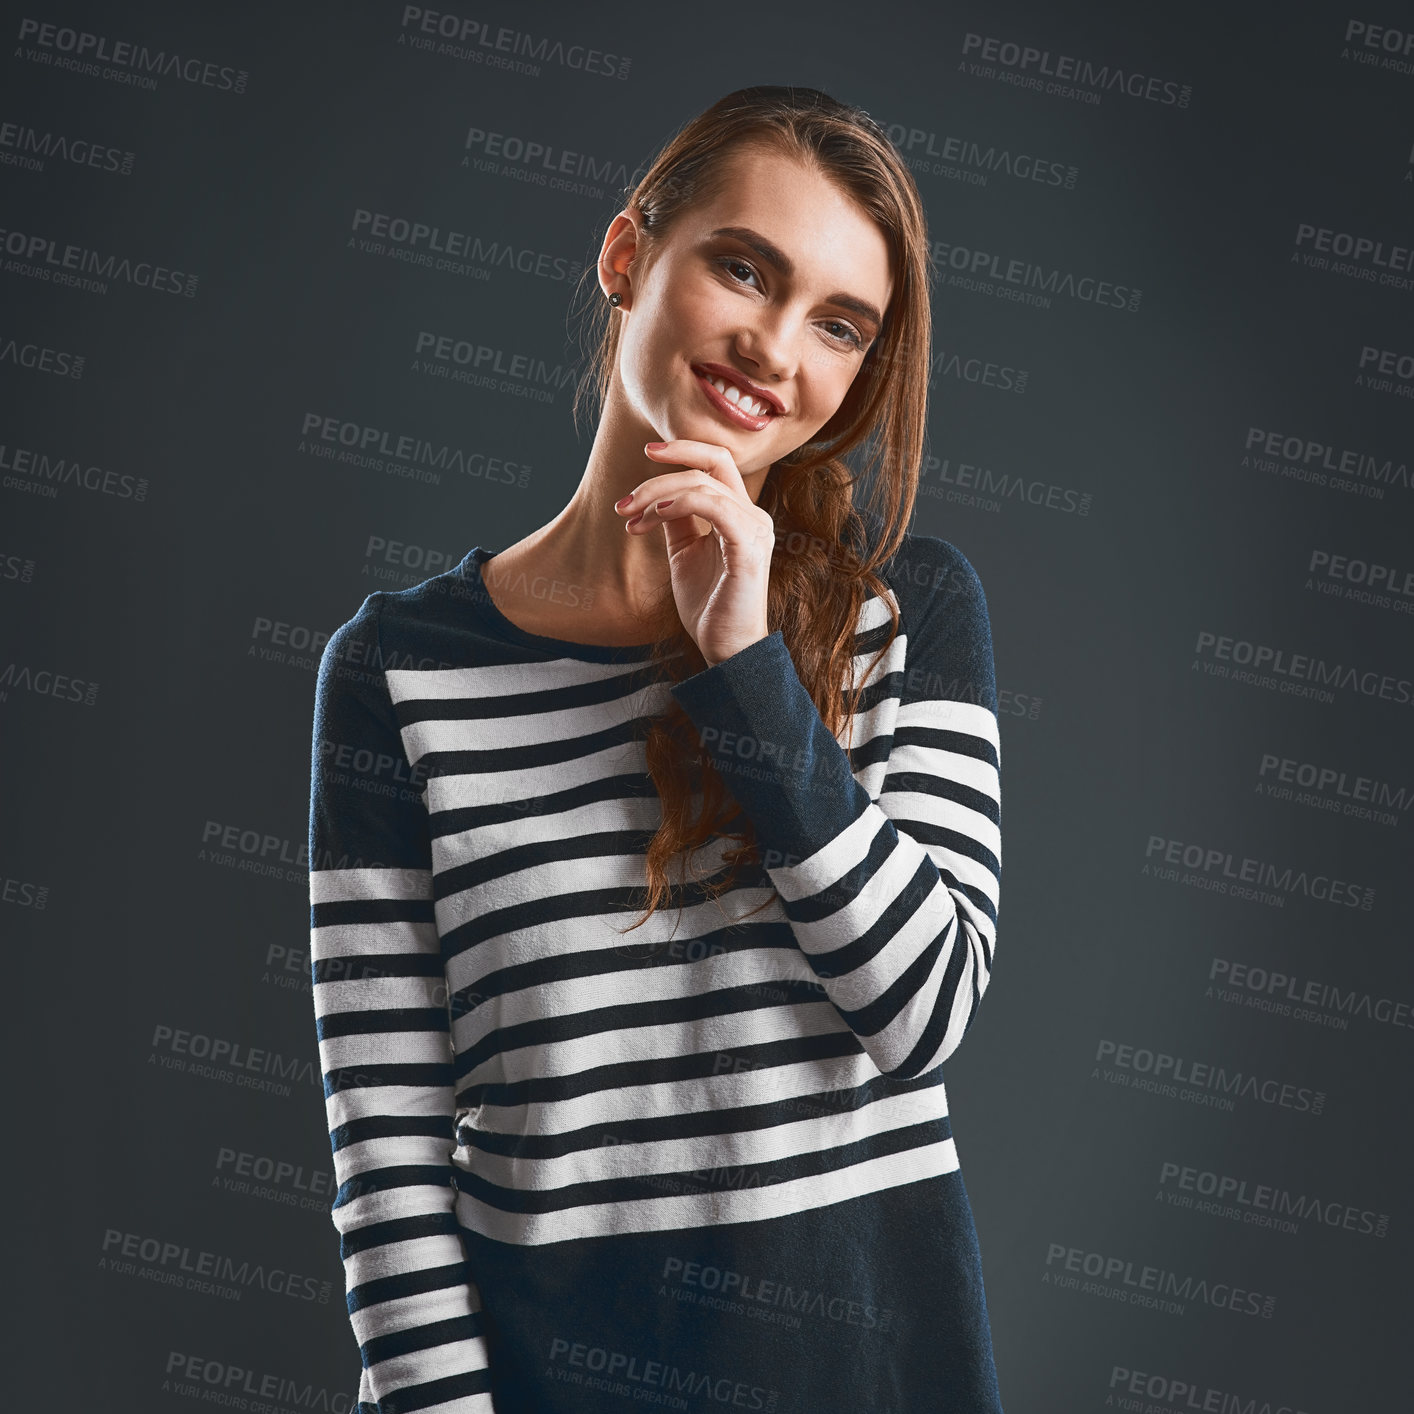 Buy stock photo Studio portrait of a cheerful young woman holding her chin while standing against a dark background